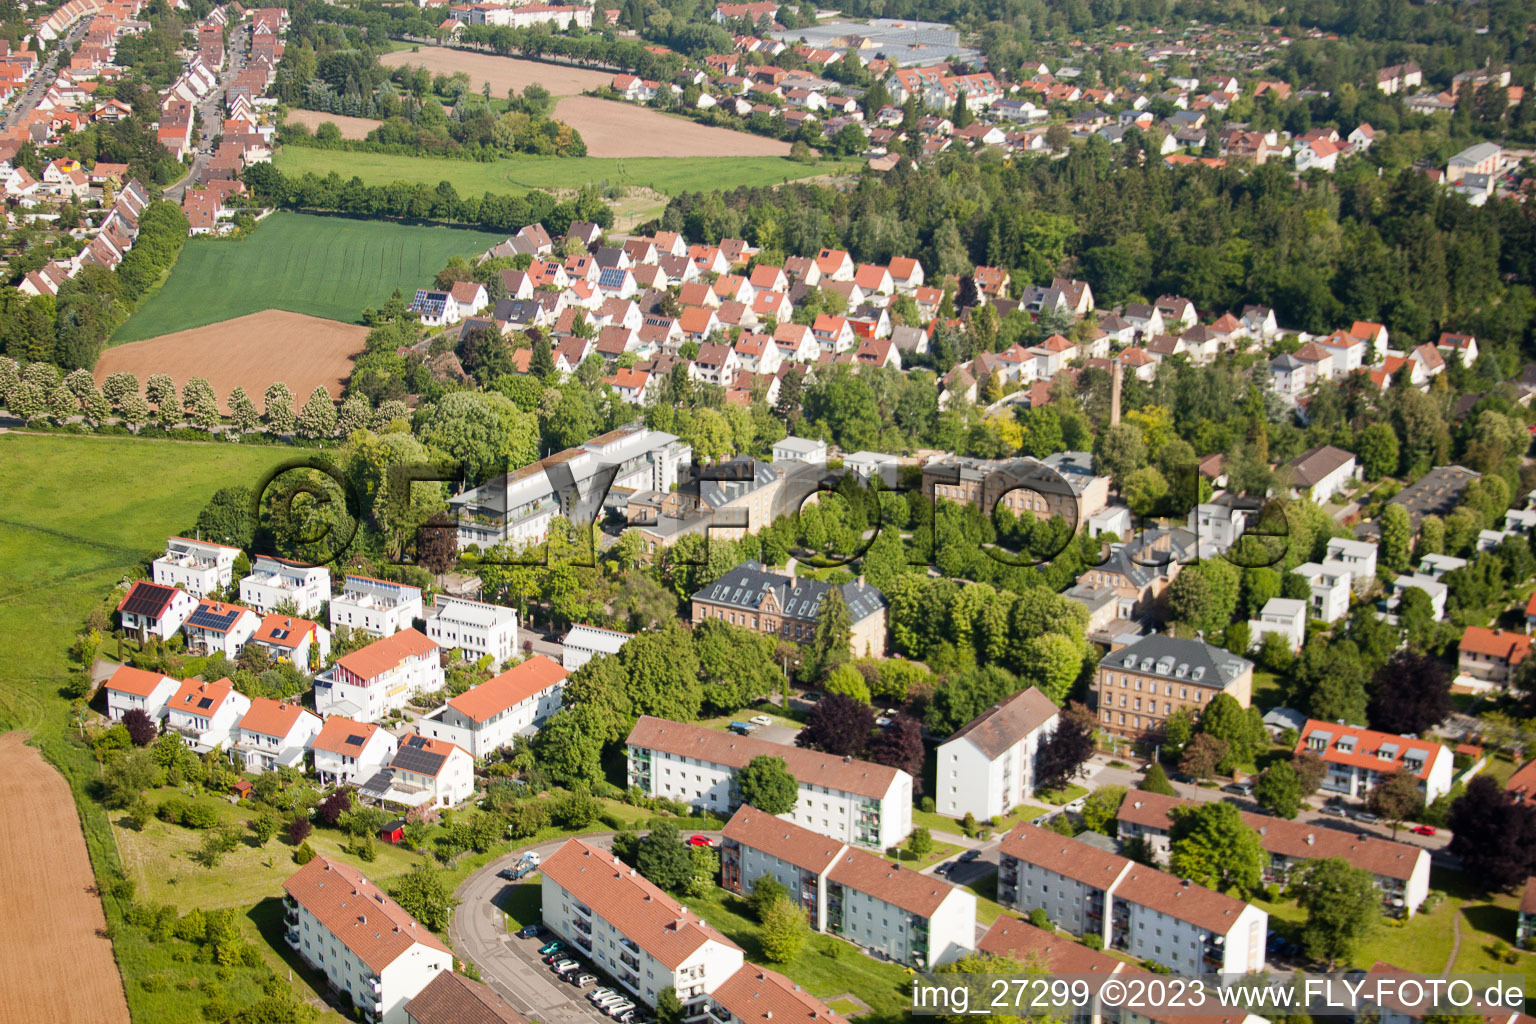 Landau in der Pfalz in the state Rhineland-Palatinate, Germany viewn from the air